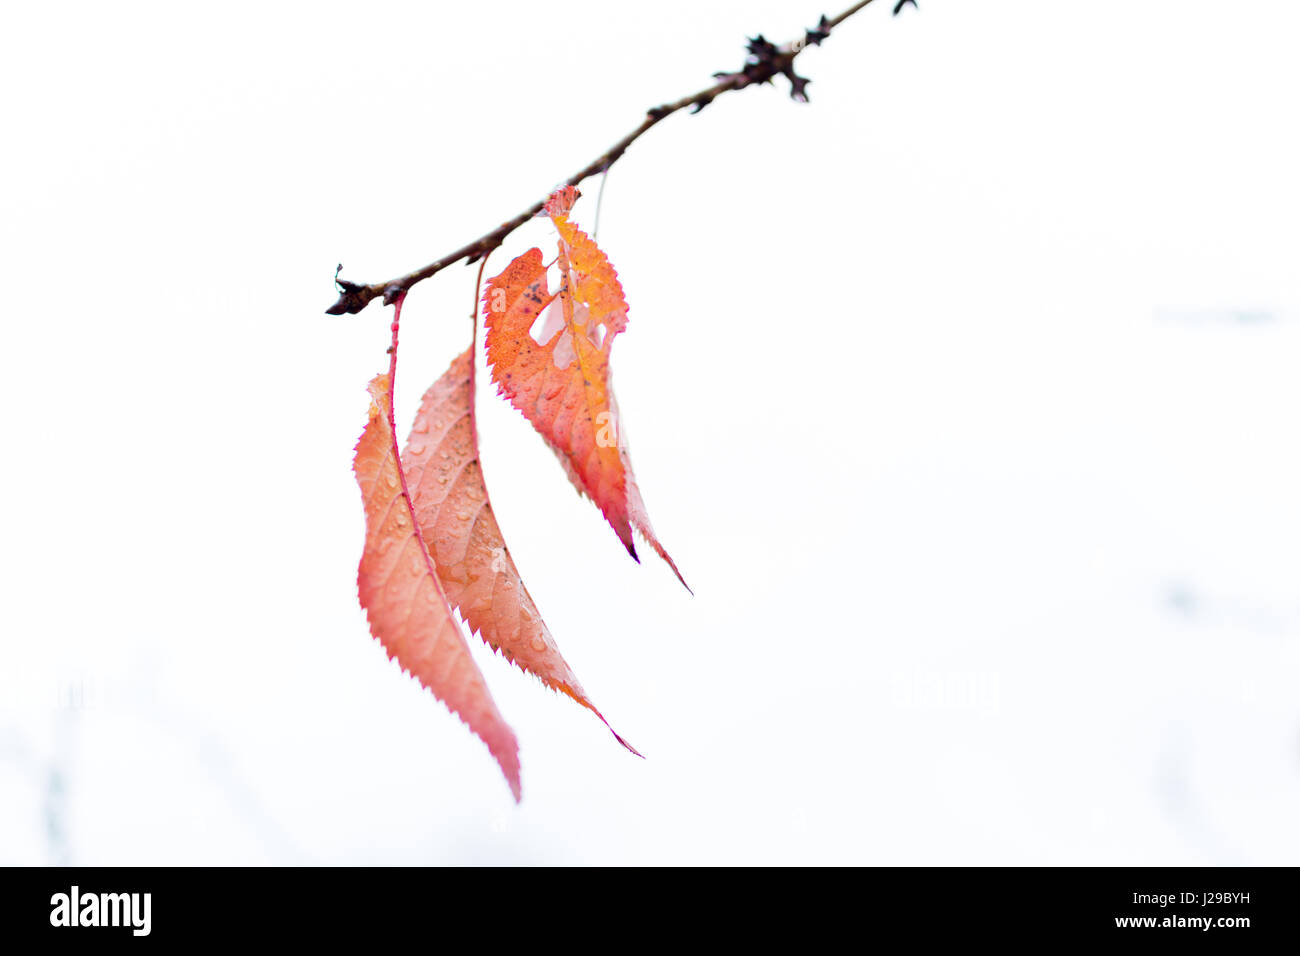 Autumn leaves remaining on cherry brunch 4 Stock Photo